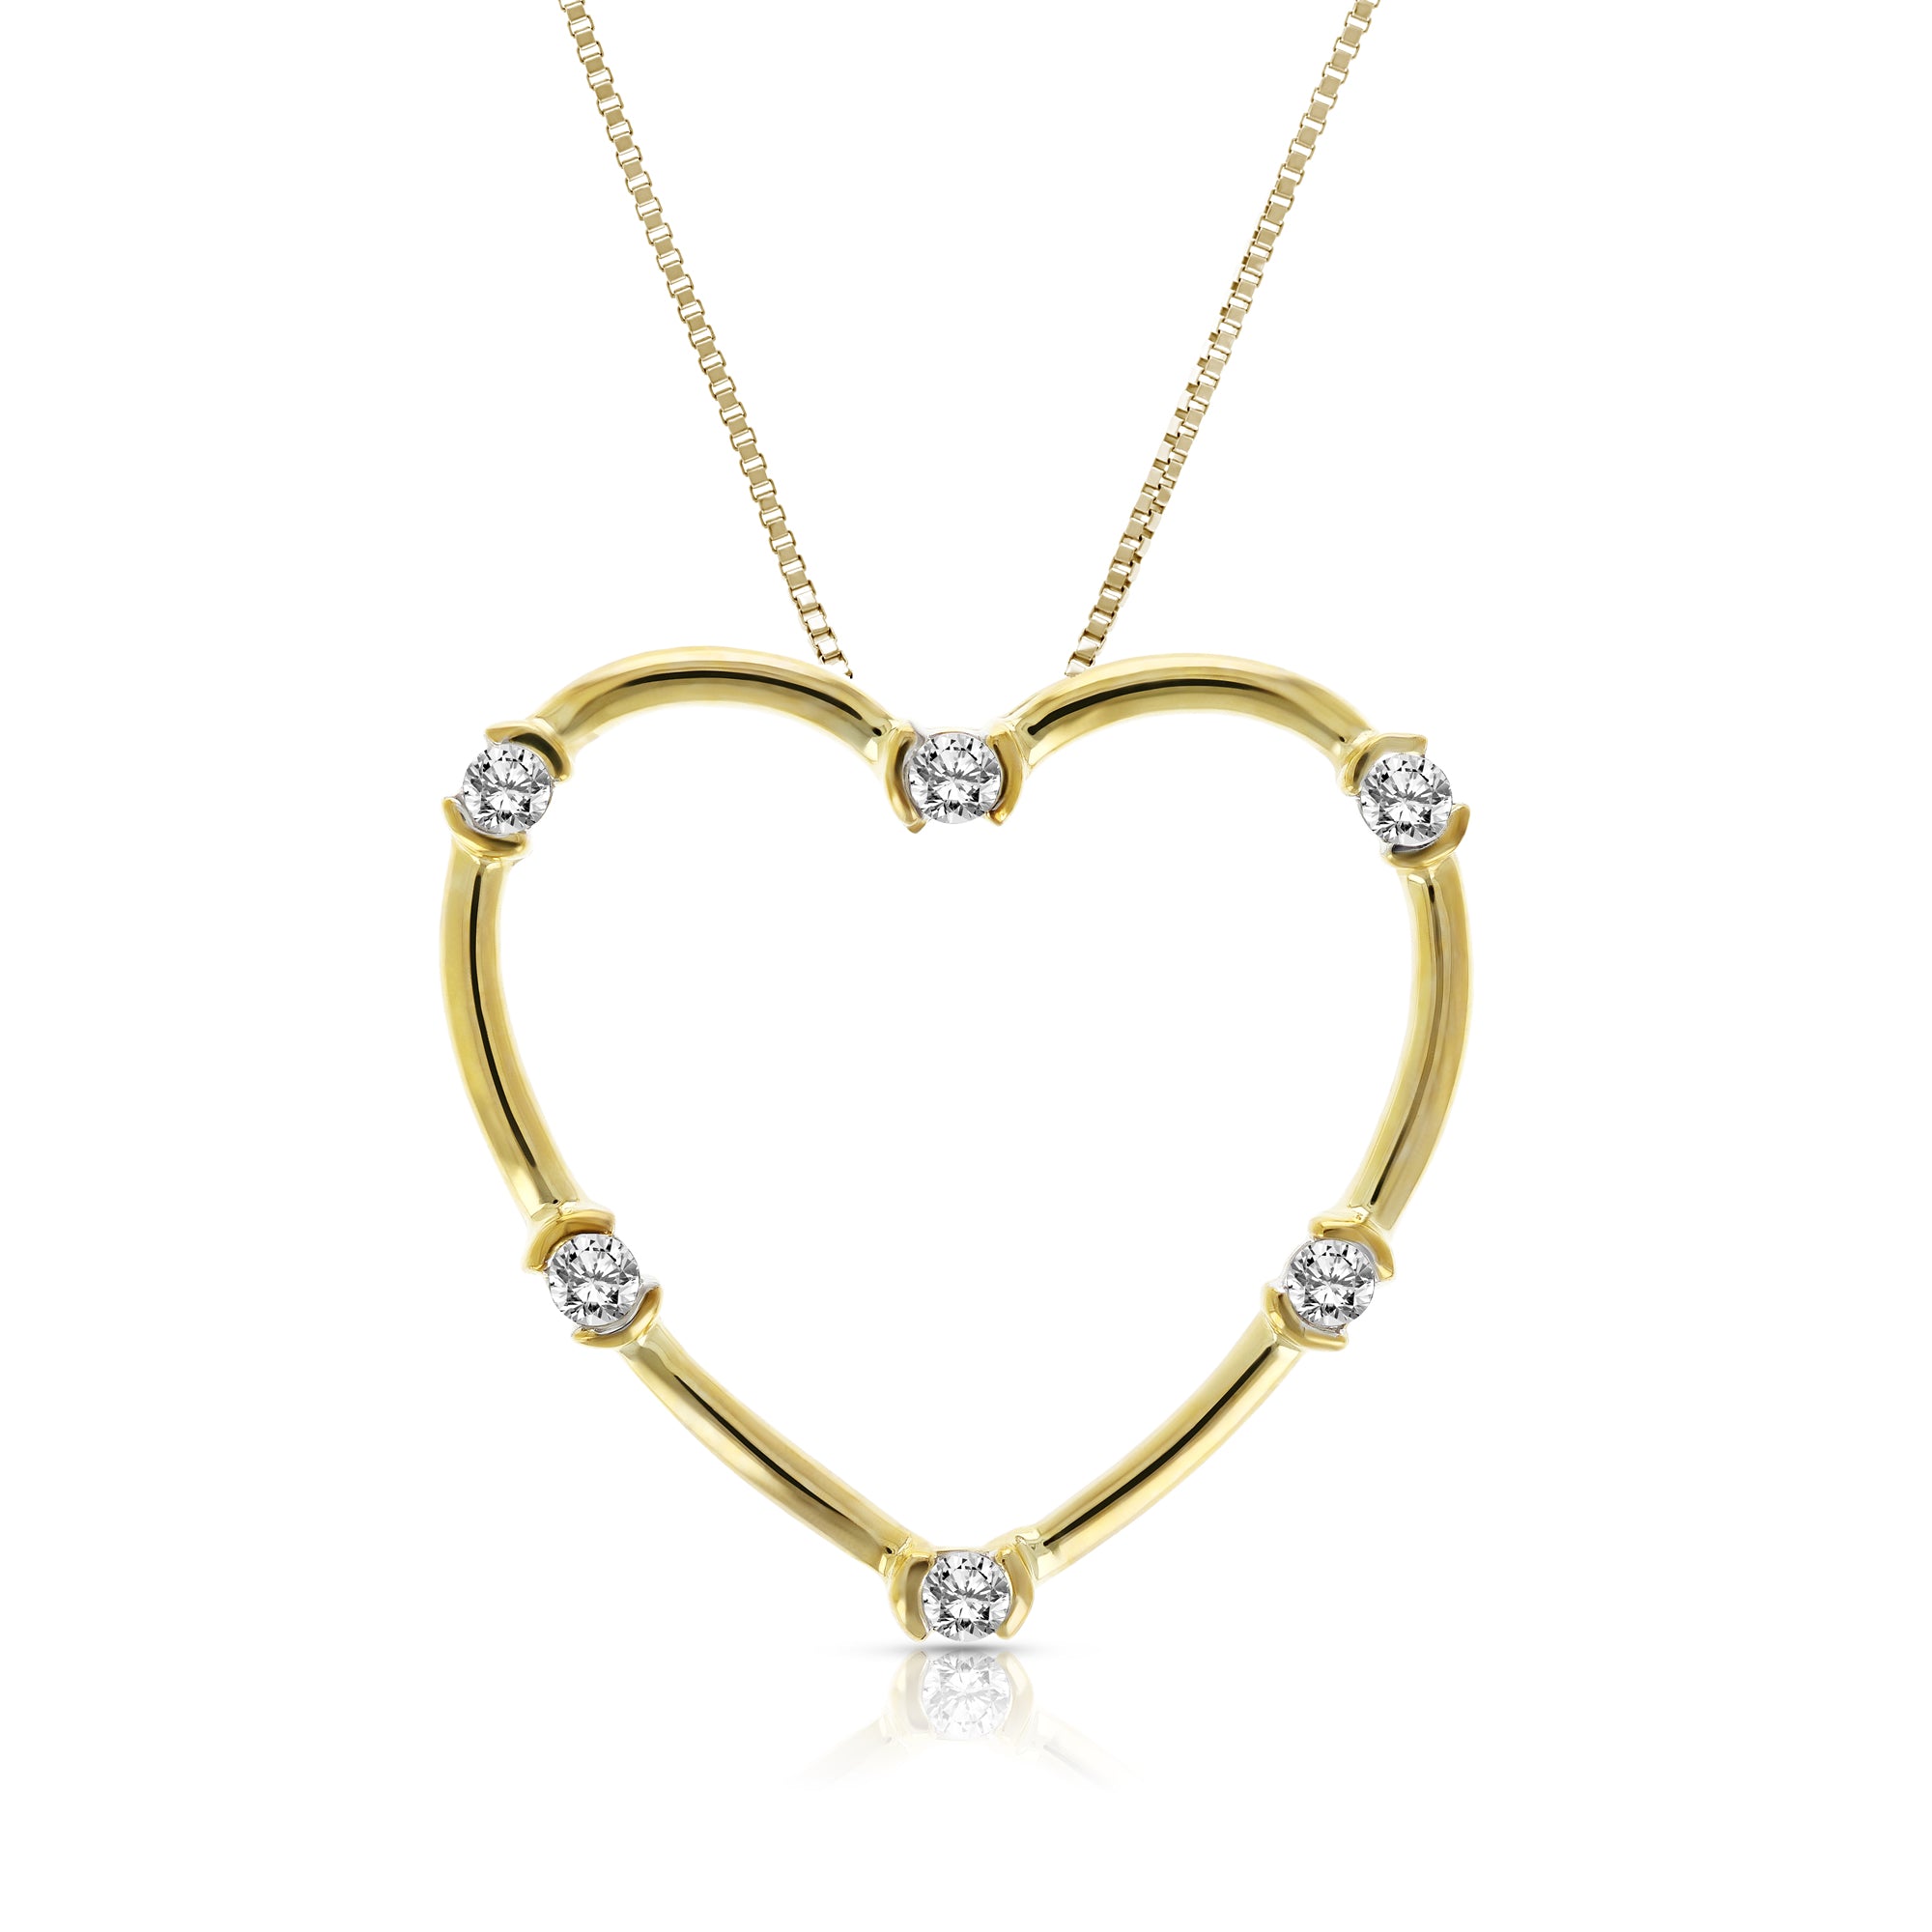 1/5 cttw Diamond Heart Pendant Necklace 10K Yellow Gold with 18 Inch Chain